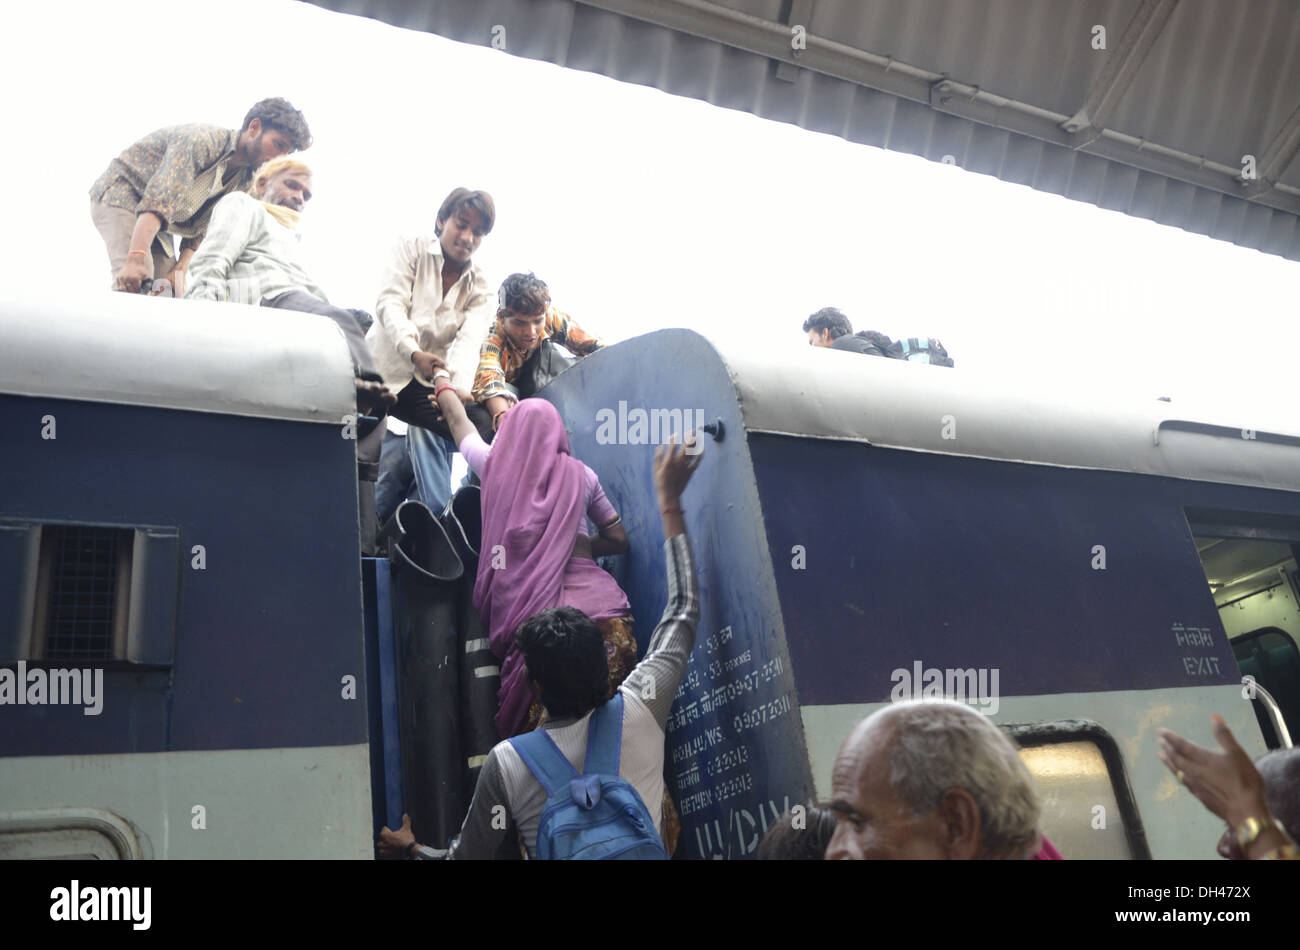 Indian man pulling up and woman climbing on the roof of train bogie compartment Jodhpur Rajasthan India Asia Stock Photo